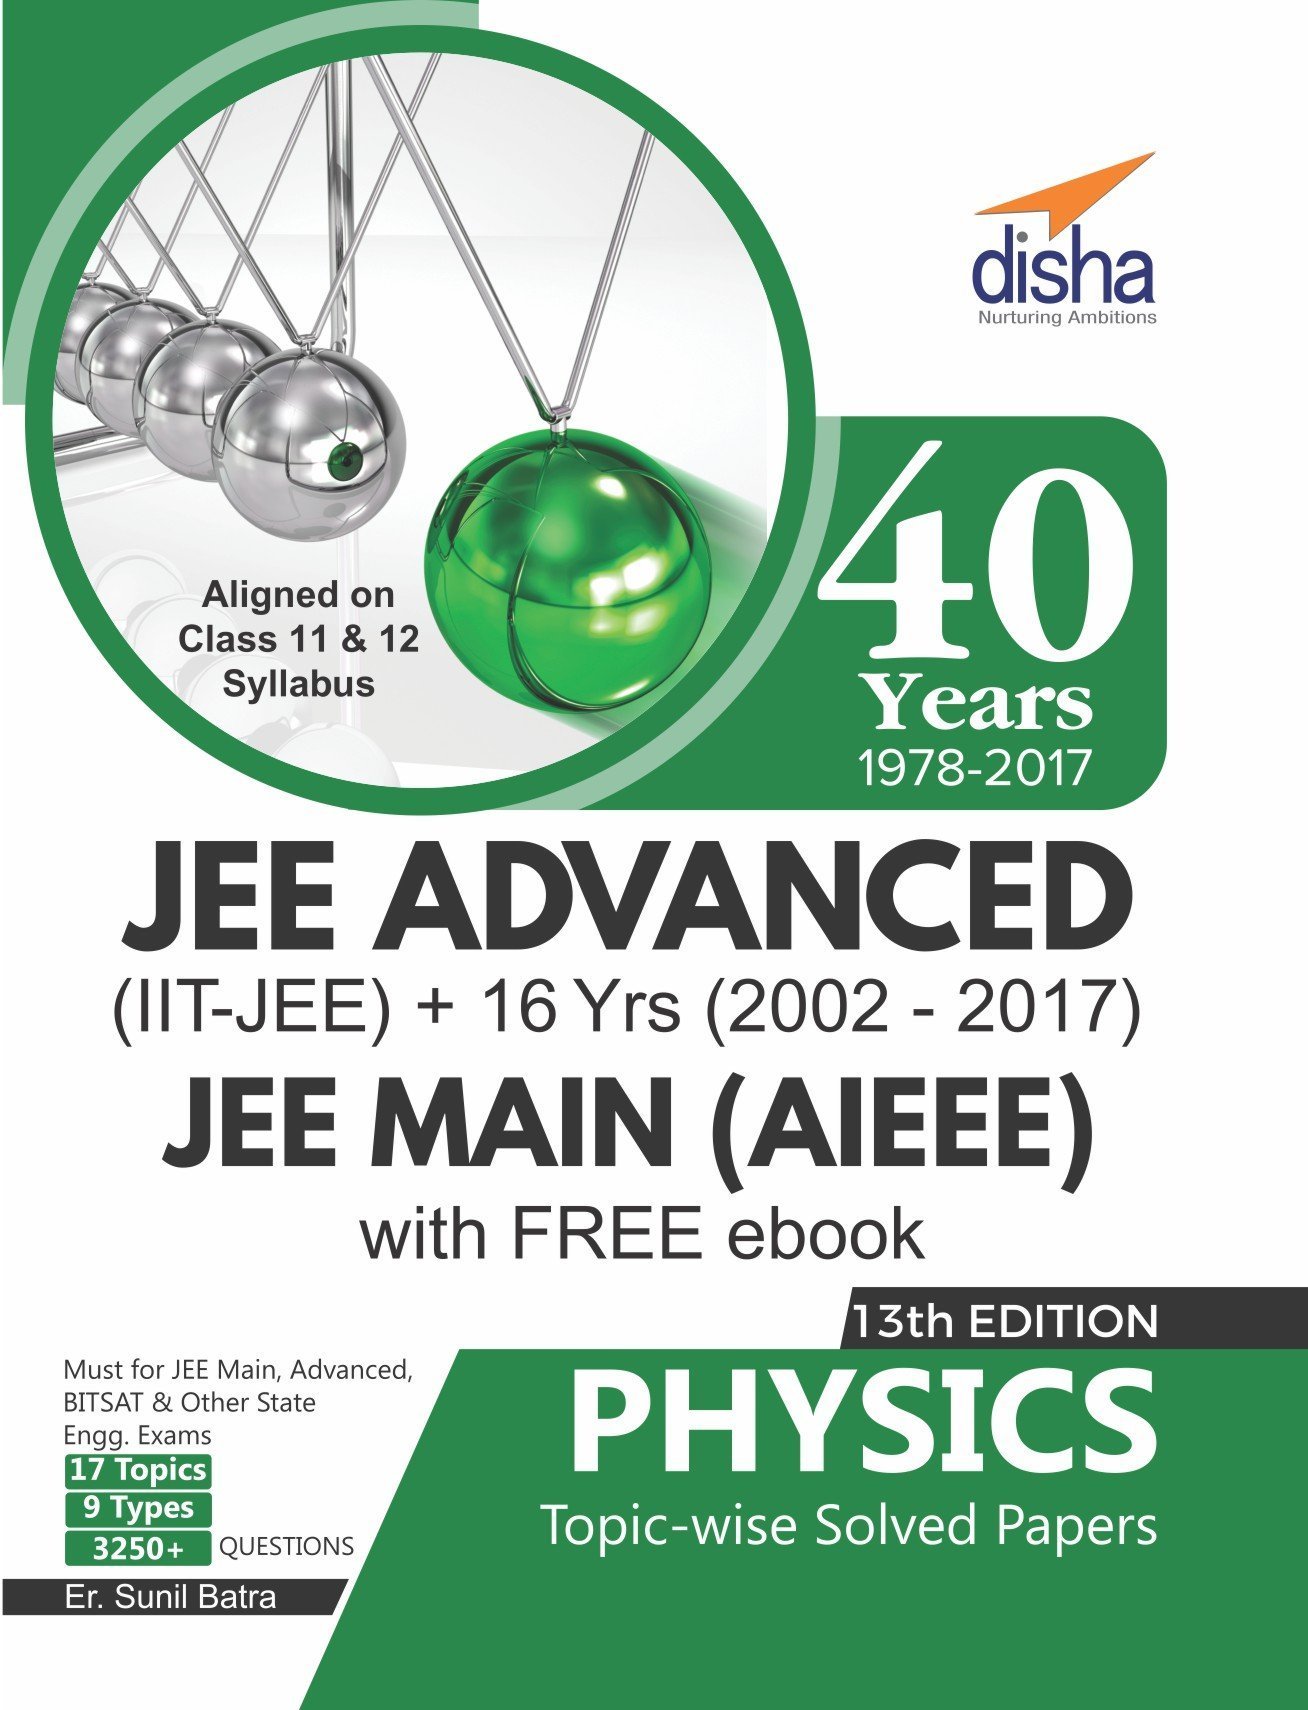 Dc pandey objective physics free download pdf for neet